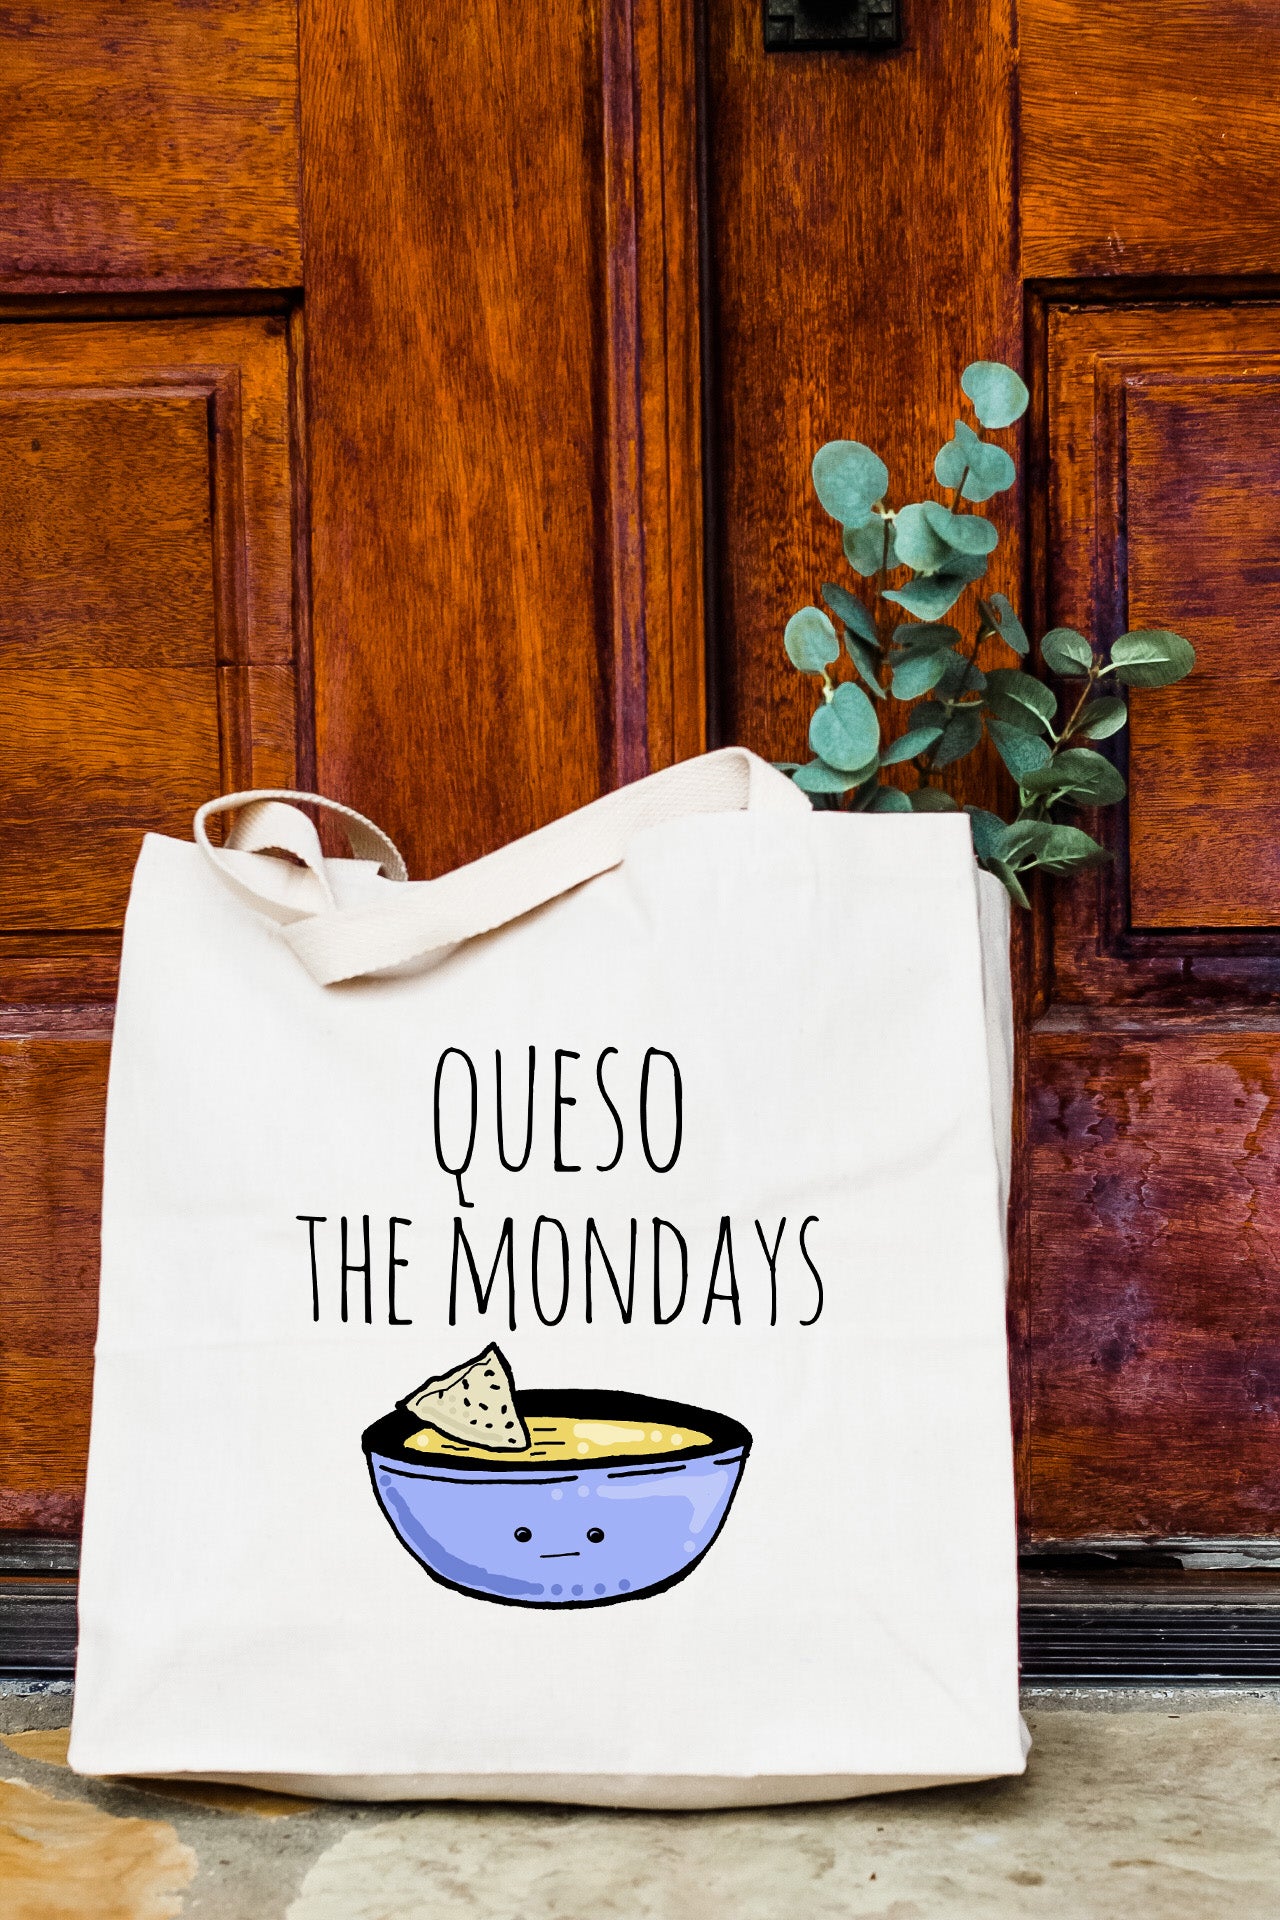 a tote bag with a picture of a bowl of soup on it